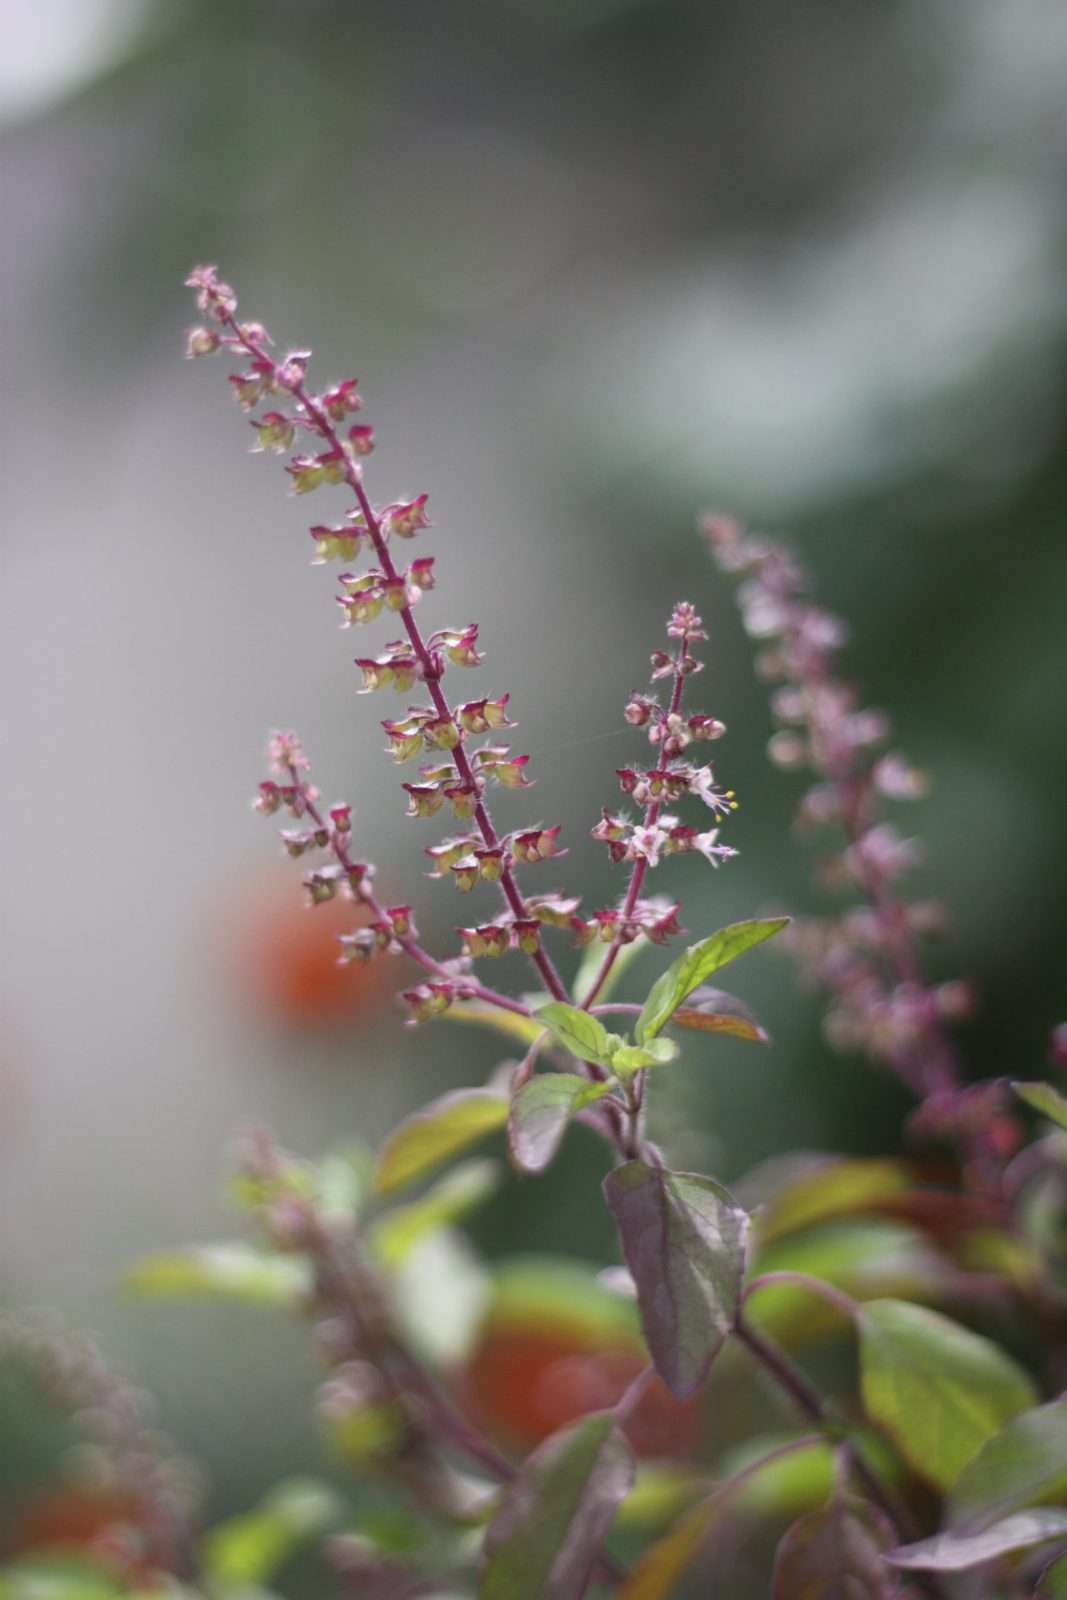 Tulsi in Indian households